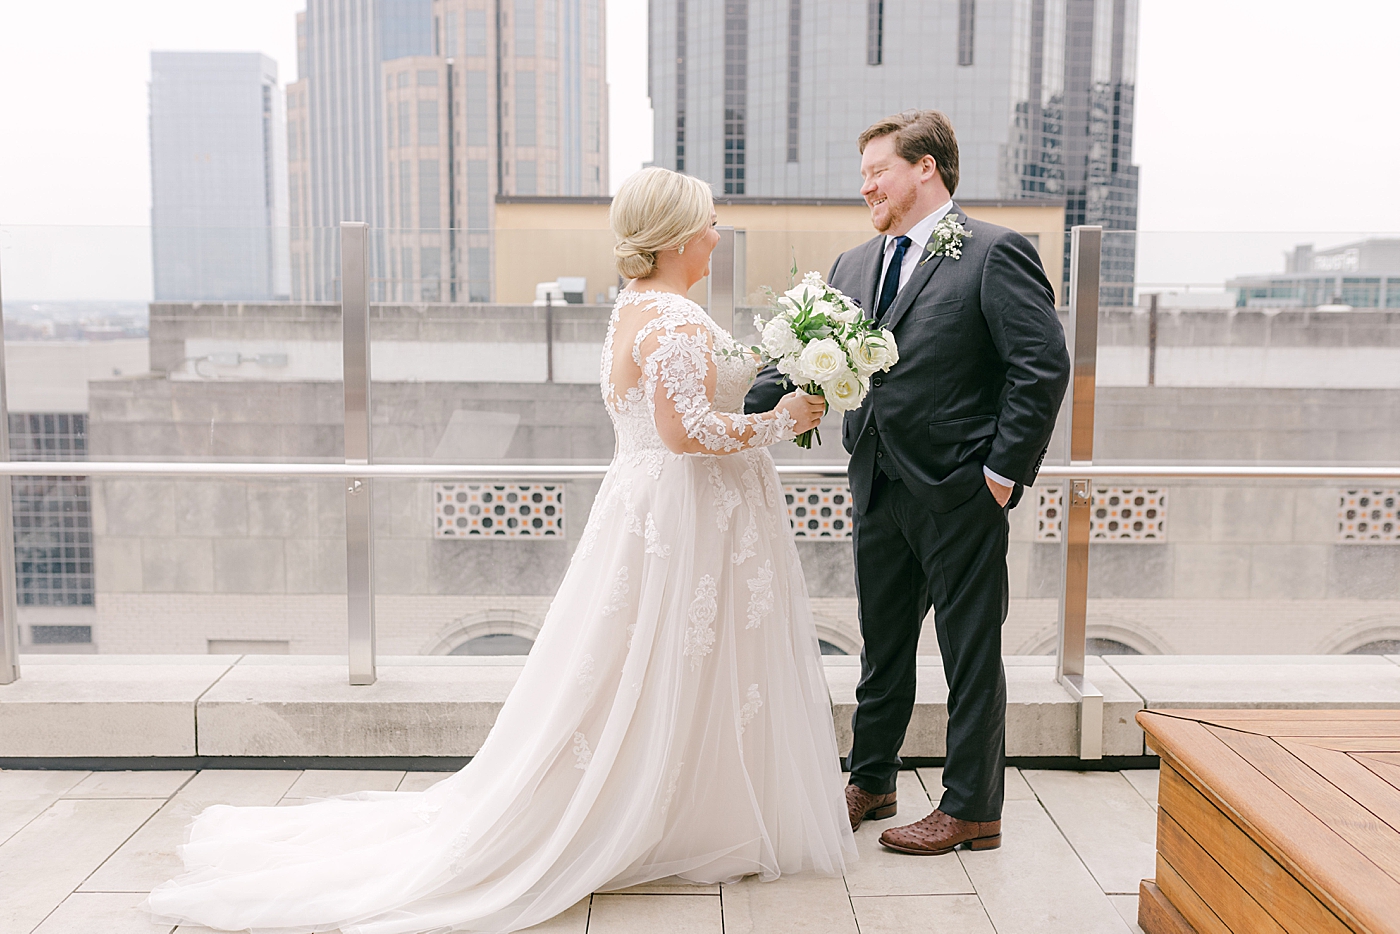 Groom seeing bride for the first time | Photo by Hope Helmuth Photography